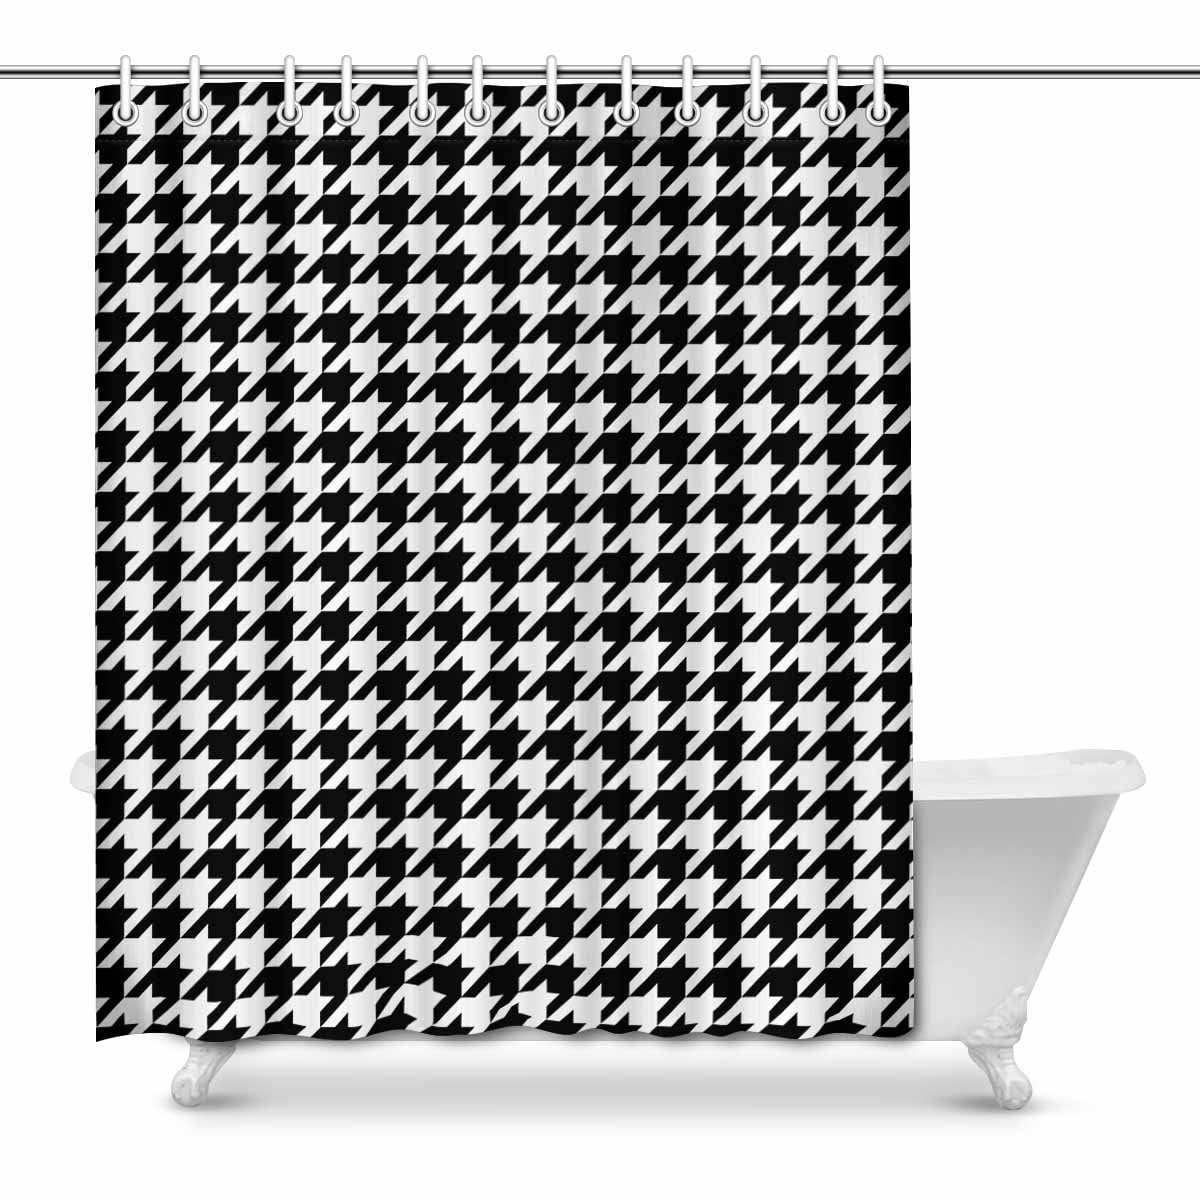 Mkhert Classical Black And White Houndstooth Checkered Pattern Home Decor Waterproof Polyester